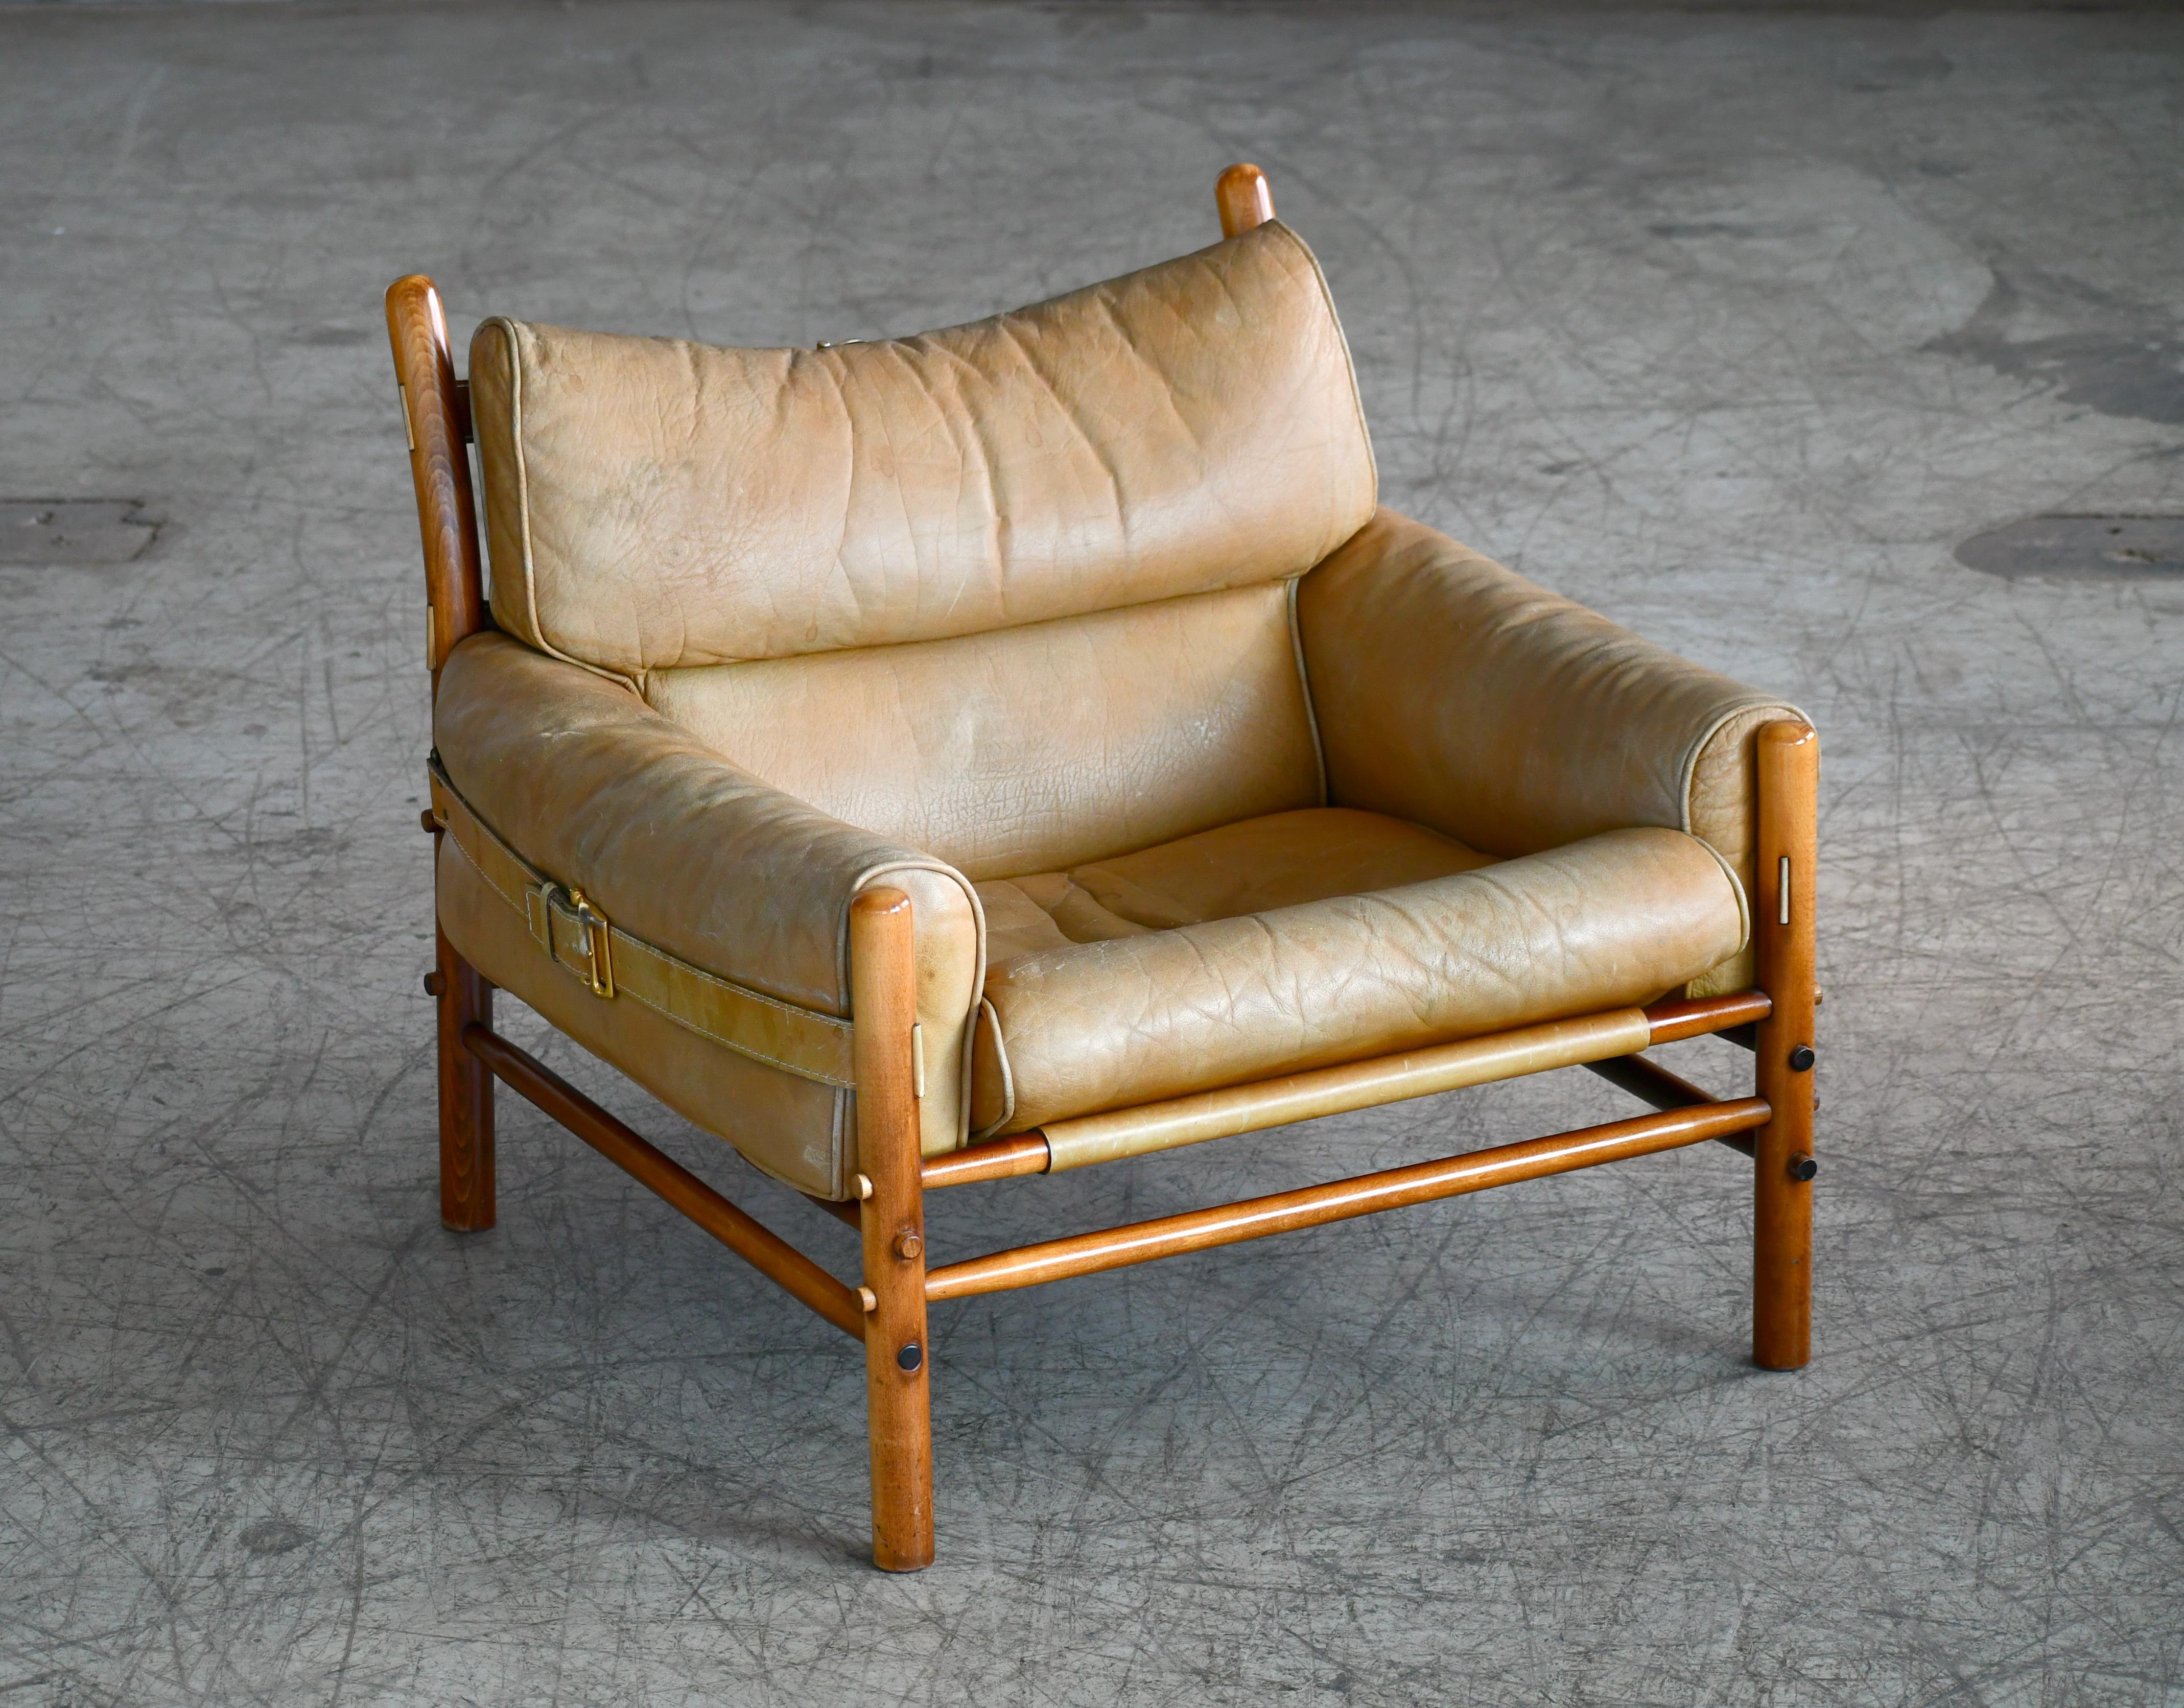 Beautiful 1960s model Inca low version safari chair in tan leather and beech wood designed by Arne Norell in the late 1960s for Norell Mobler, Sweden. The chair is assembled without any screws or hardware and held together by the heavy gauge saddle